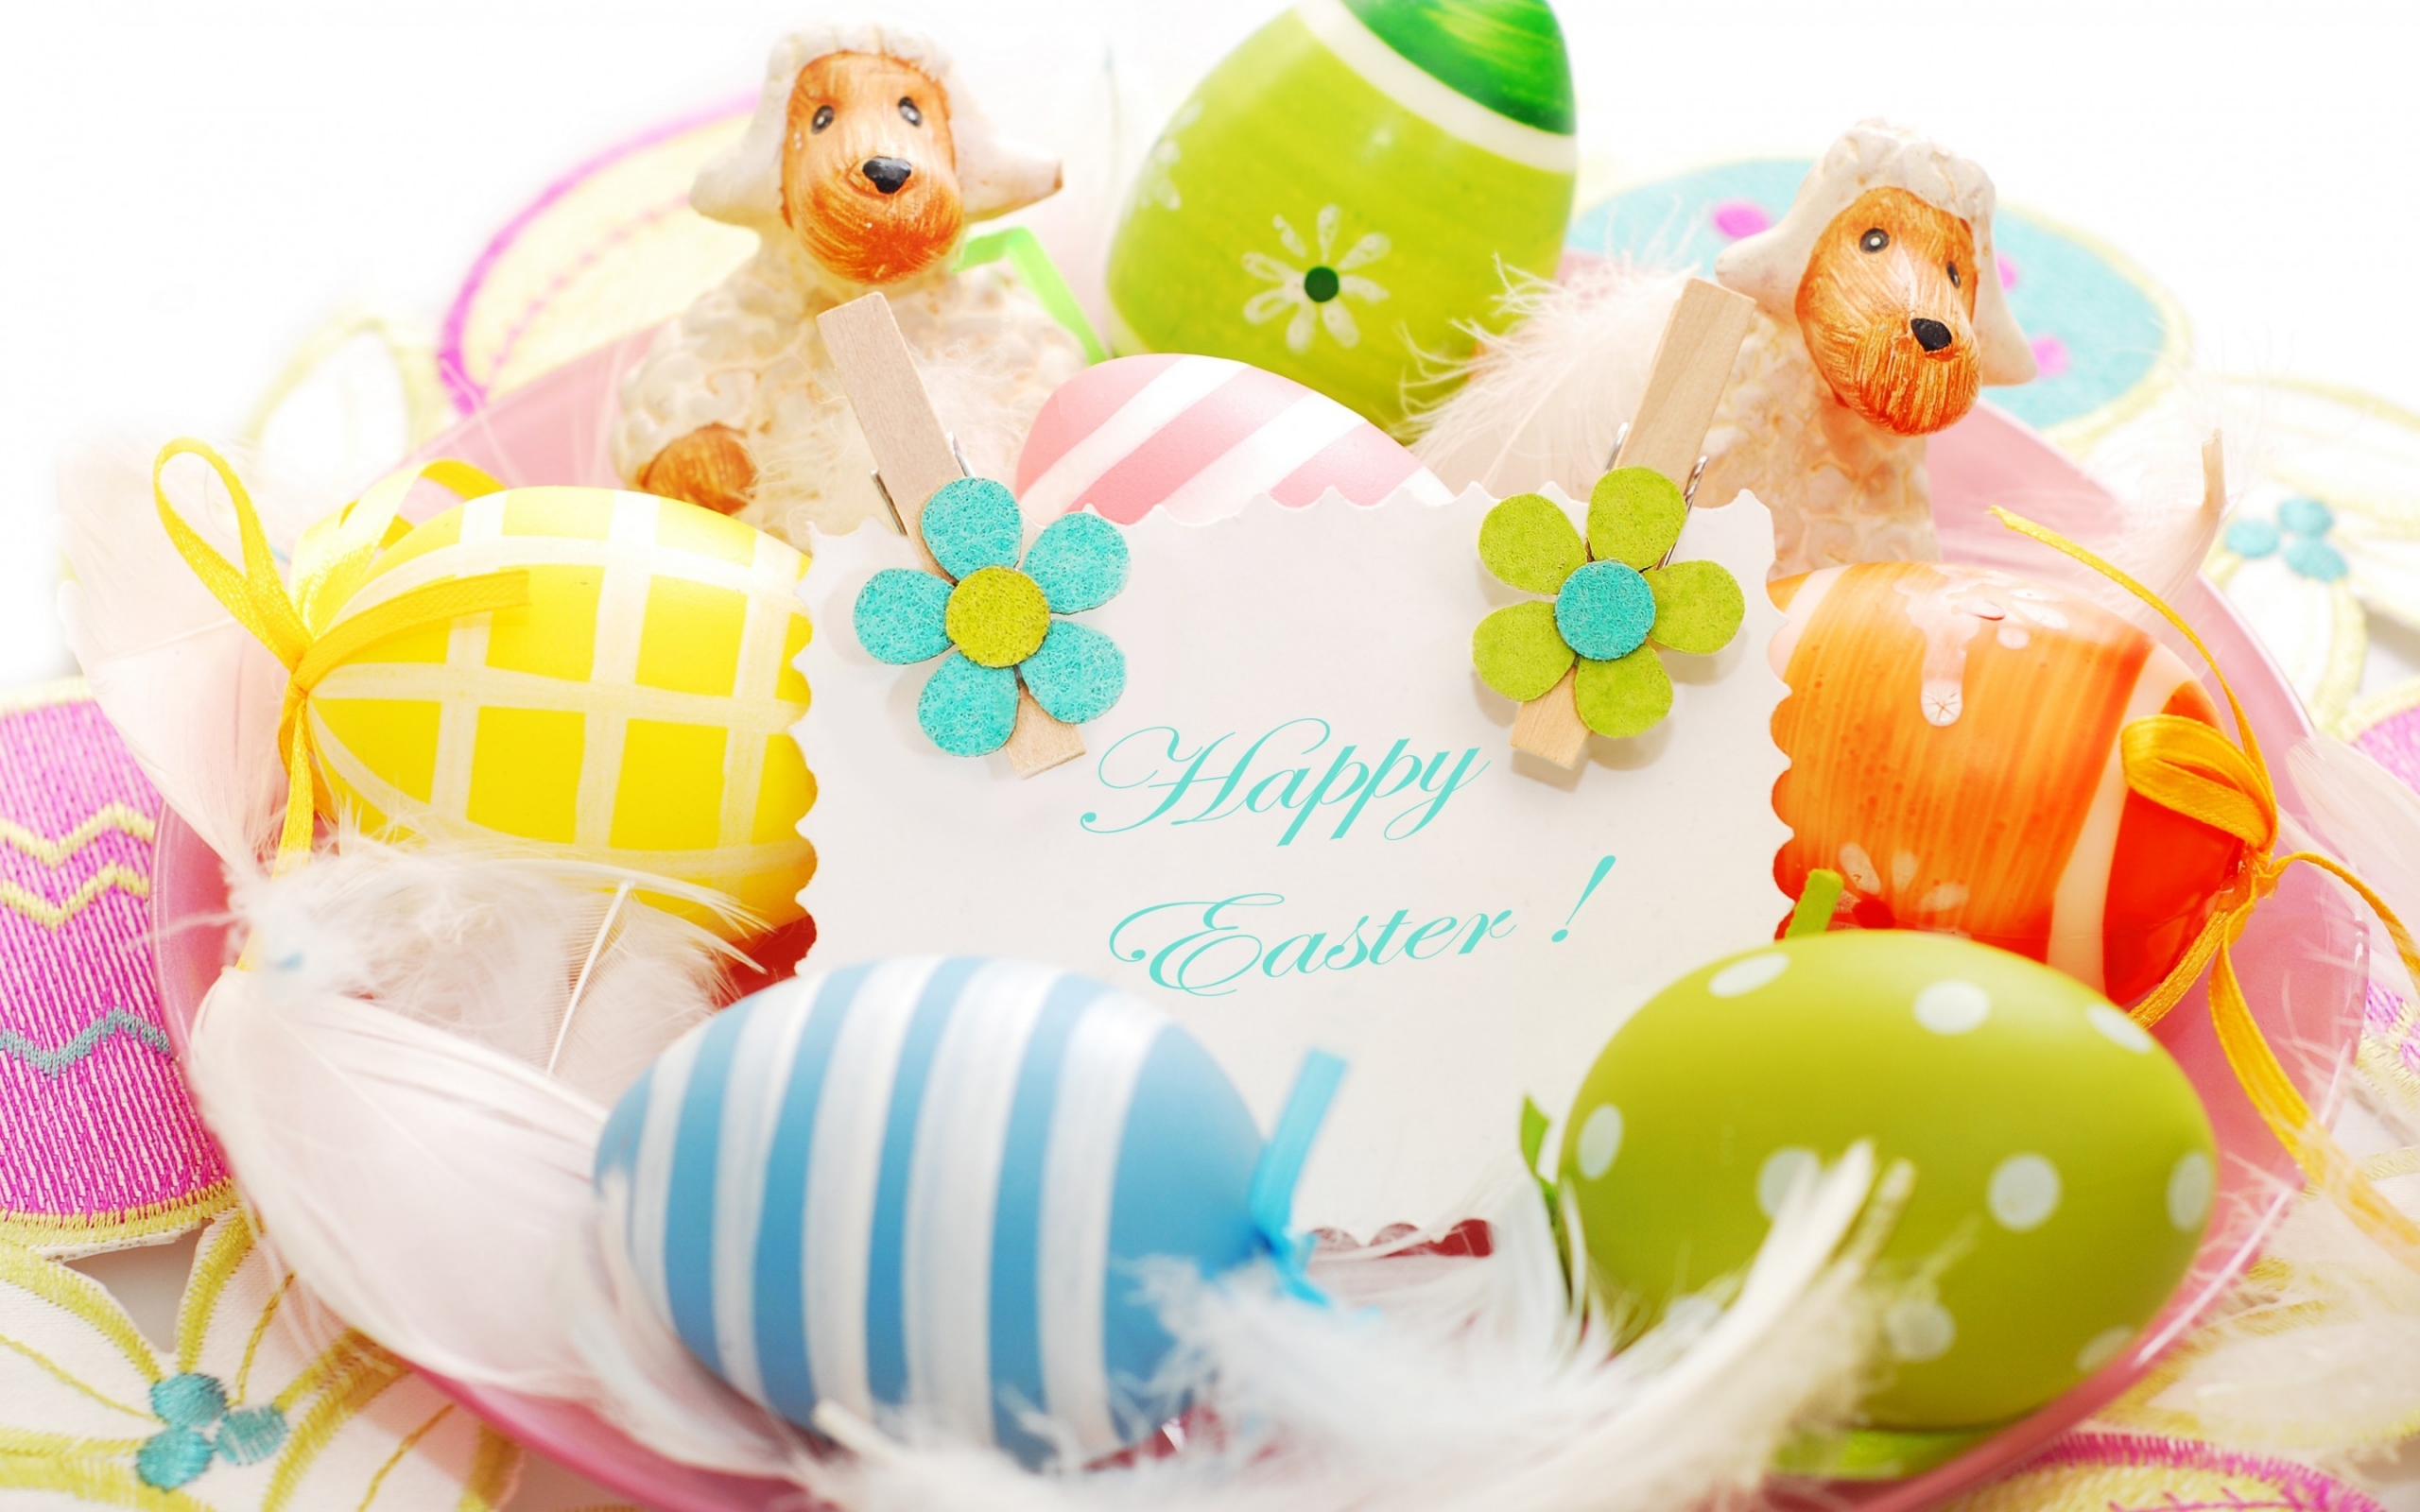 2014 Happy Easter Decorations for 2560 x 1600 widescreen resolution